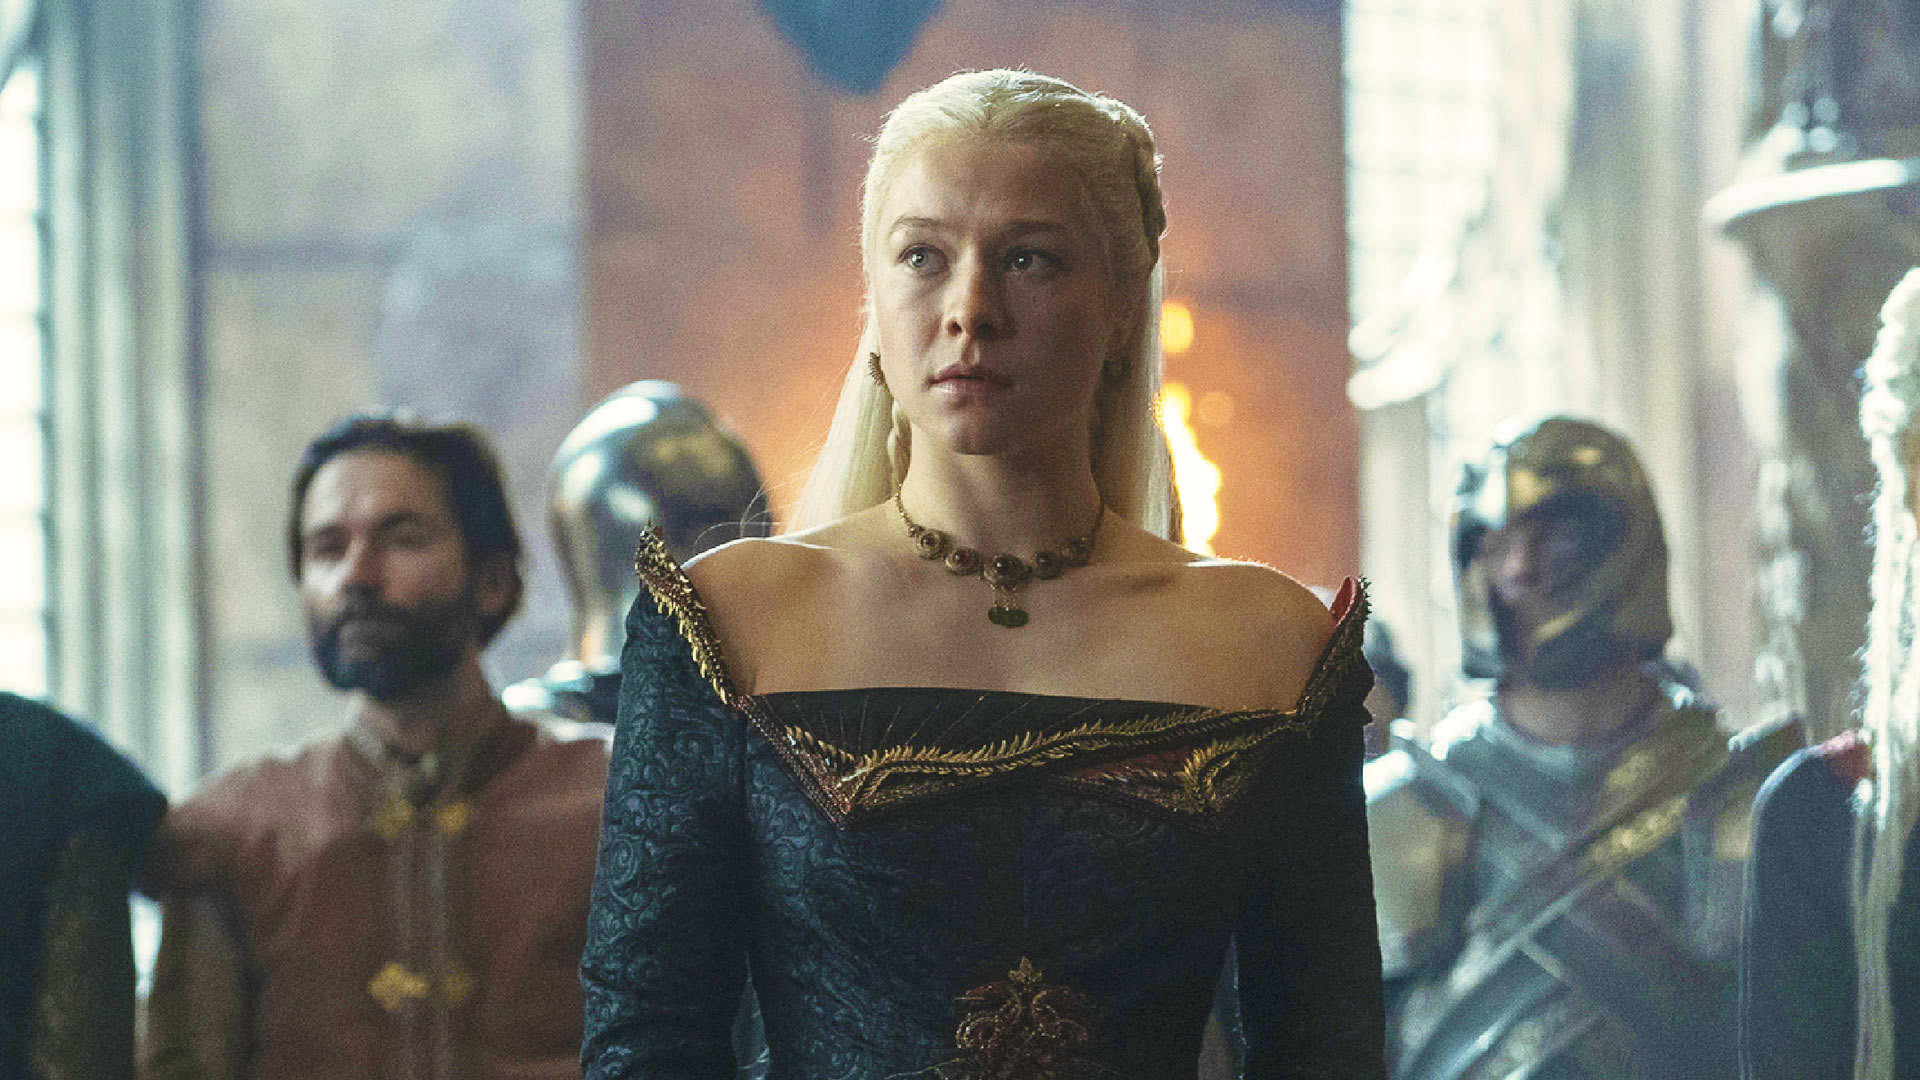 House of the Dragon Backlash Over Season 2 Casting Echoes Emma D'Arcy Controversy